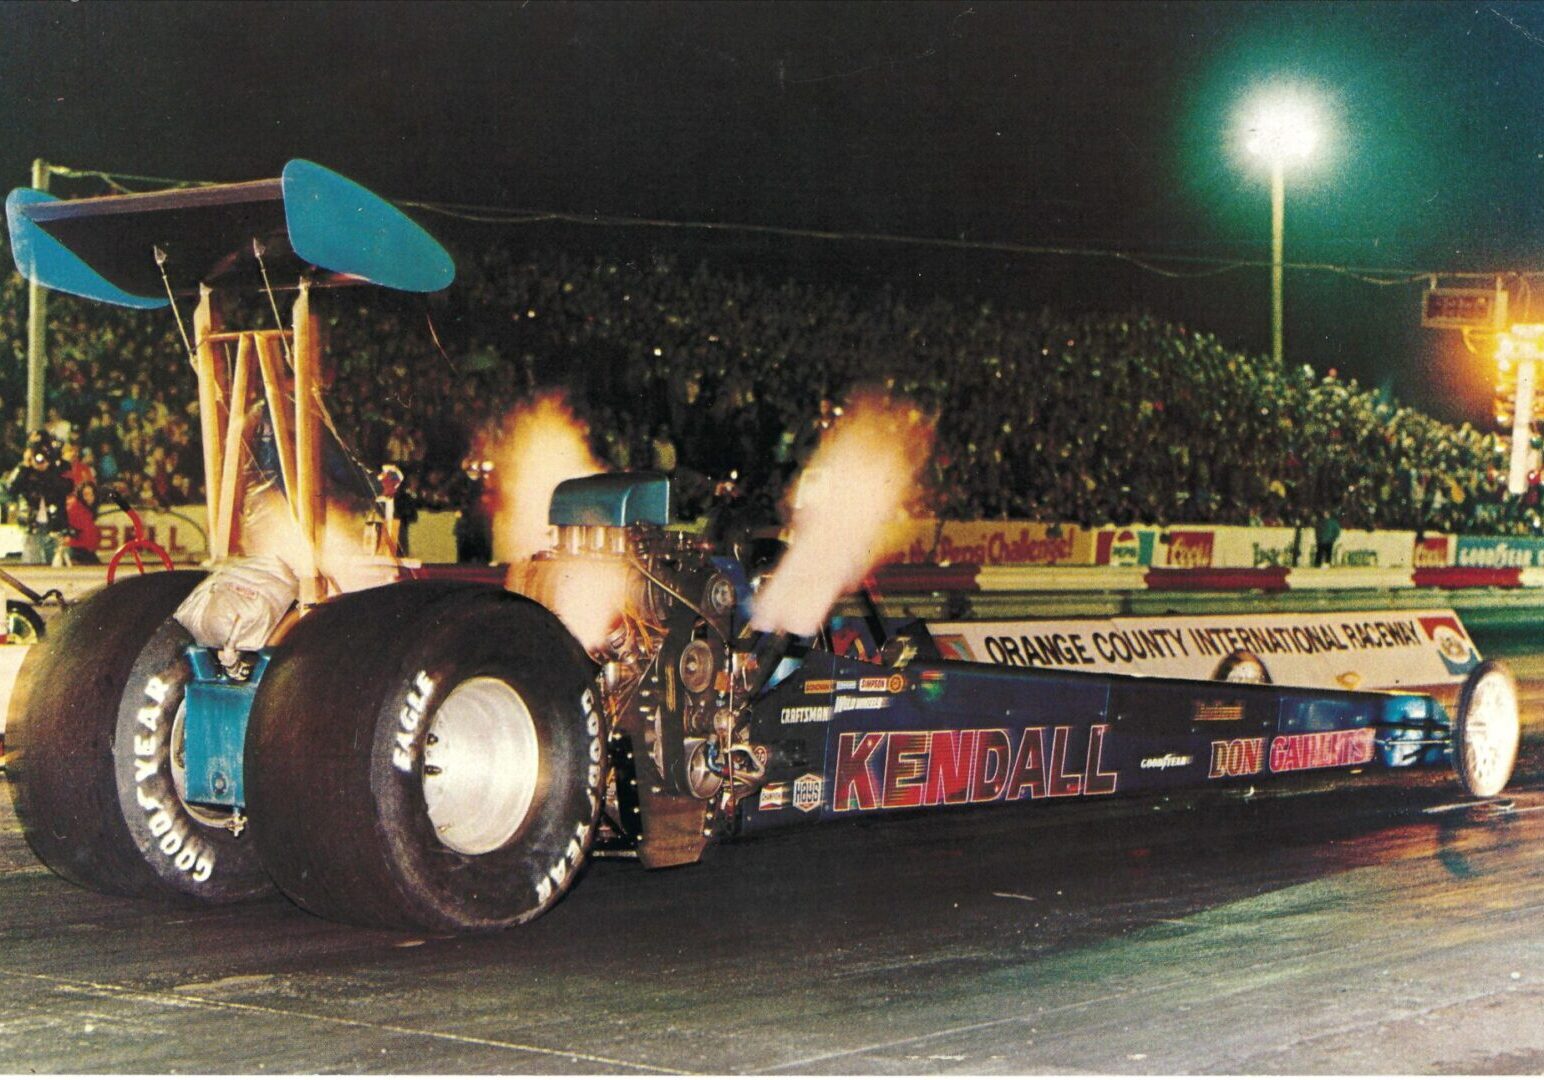 A drag racer with an oversized tire competing in drag racing.